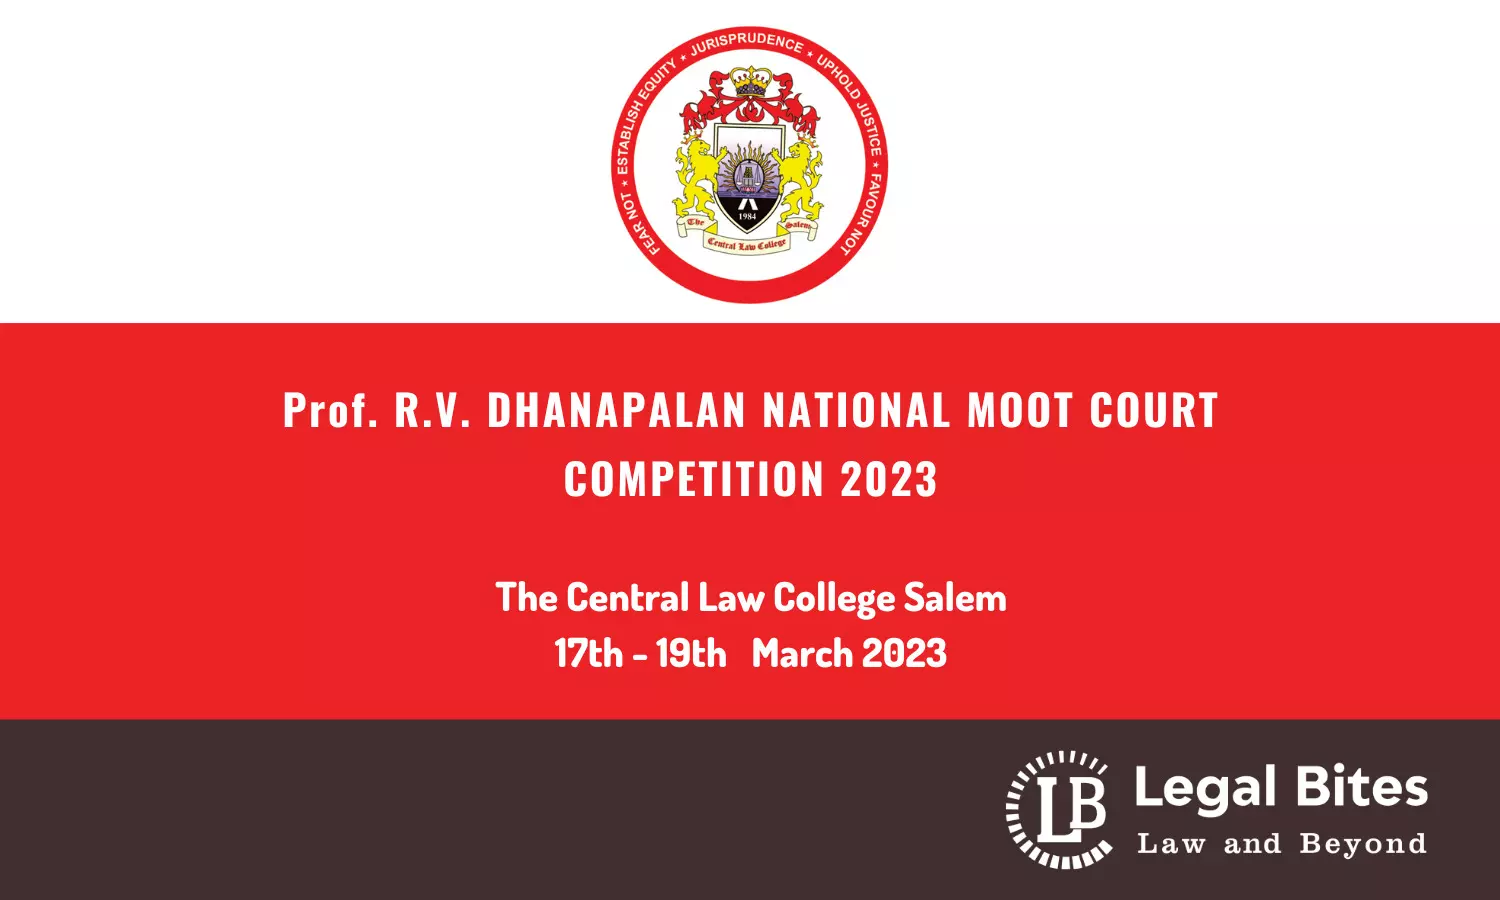 Prof R V Dhanapalan National Moot Court Competition 2023